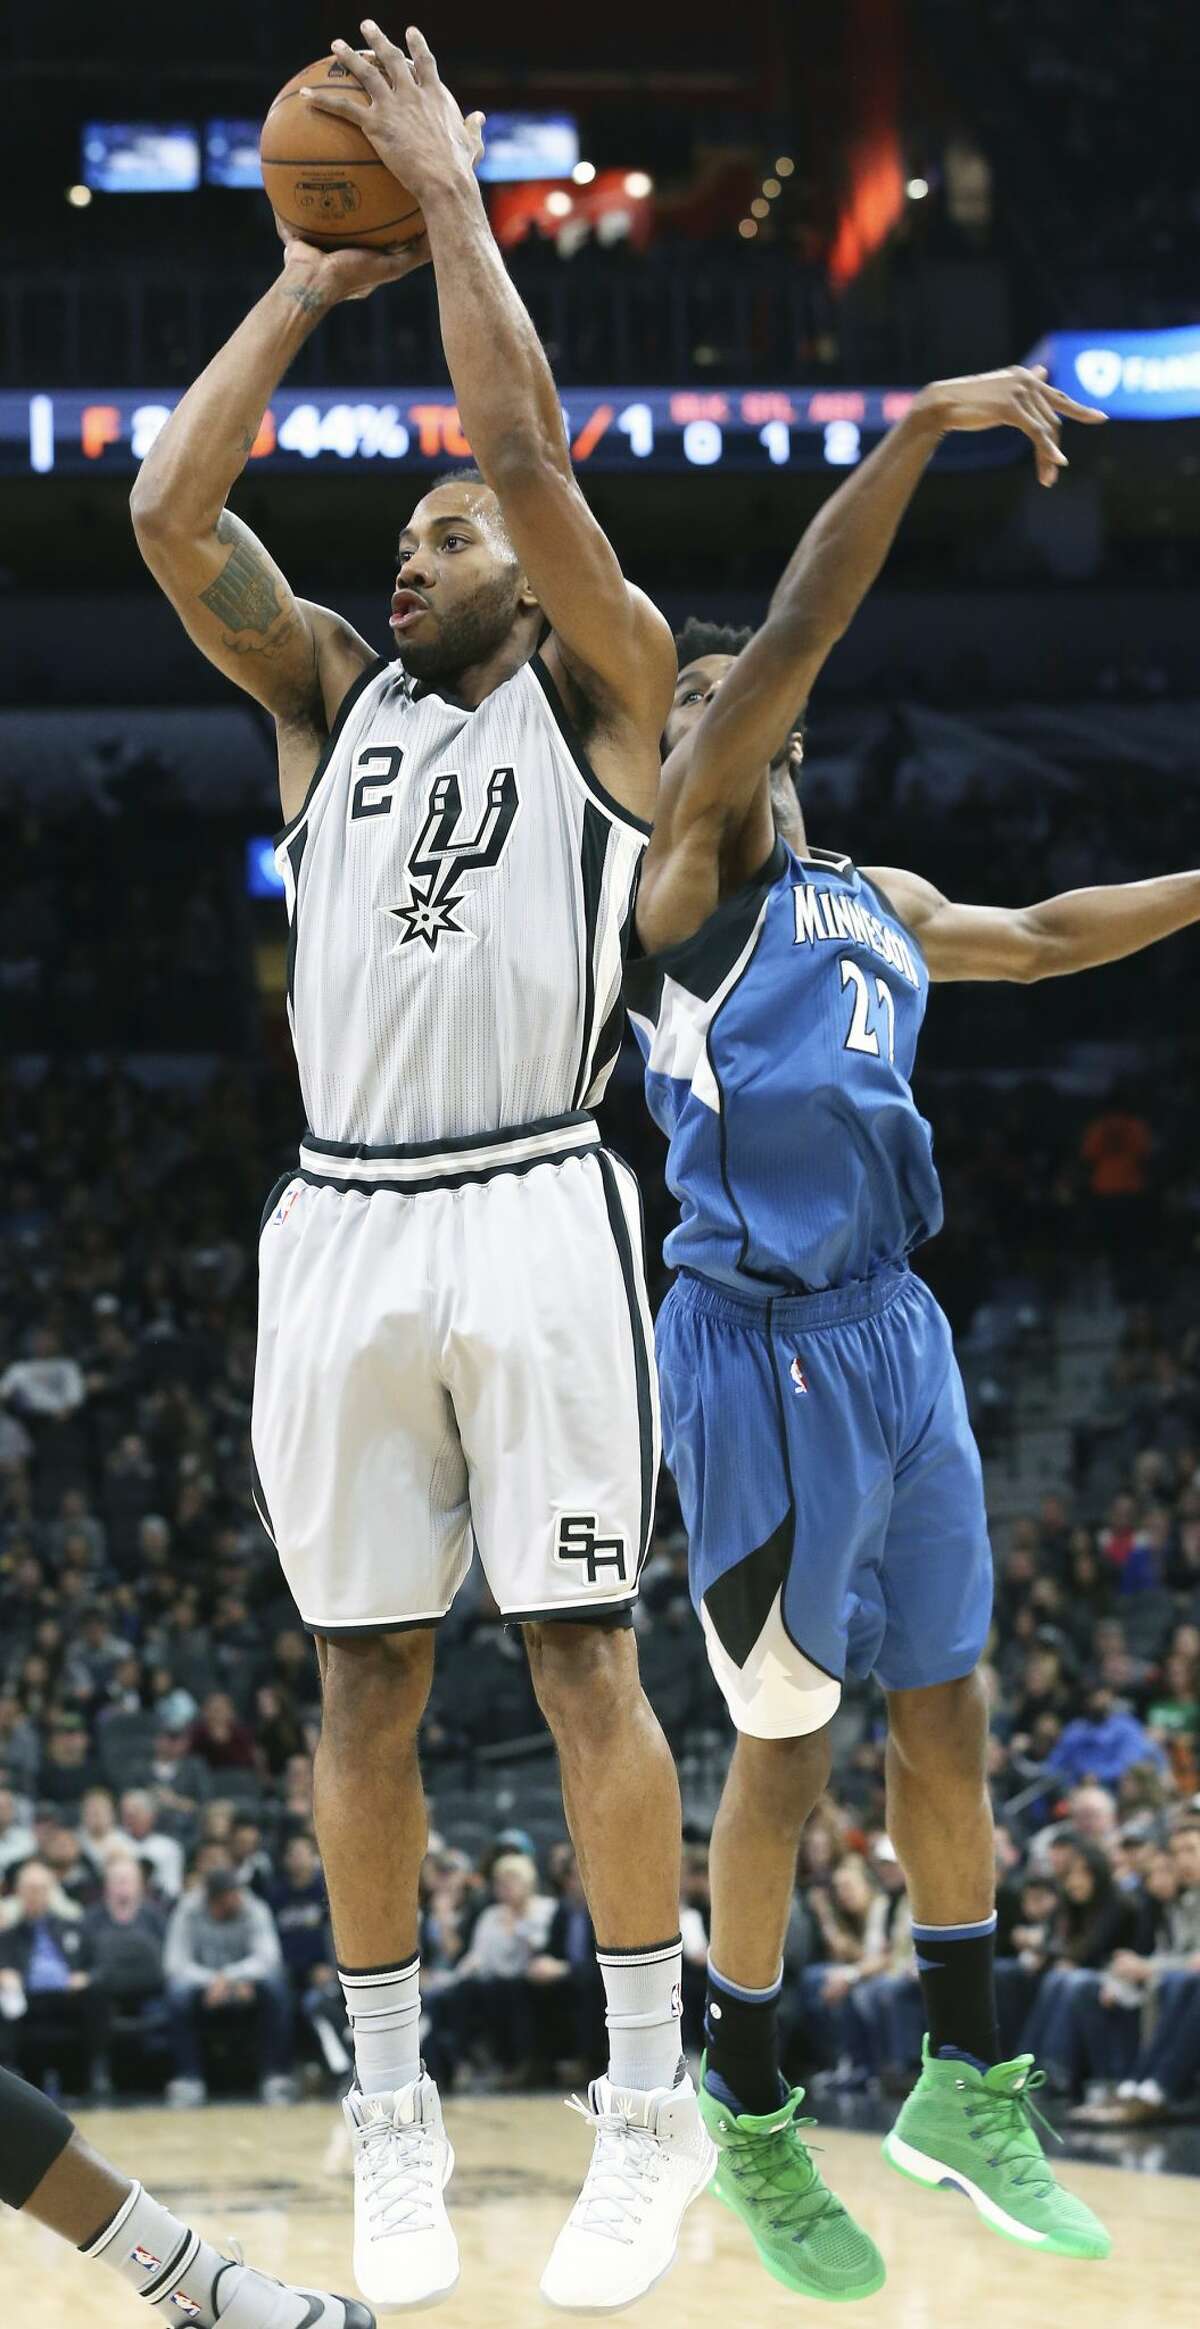 Kawhi Leonard takes a jumper after faking Andrew Wiggins in the first half as the Spurs host the Timberwolves at the AT&T Center on March 4, 2017.